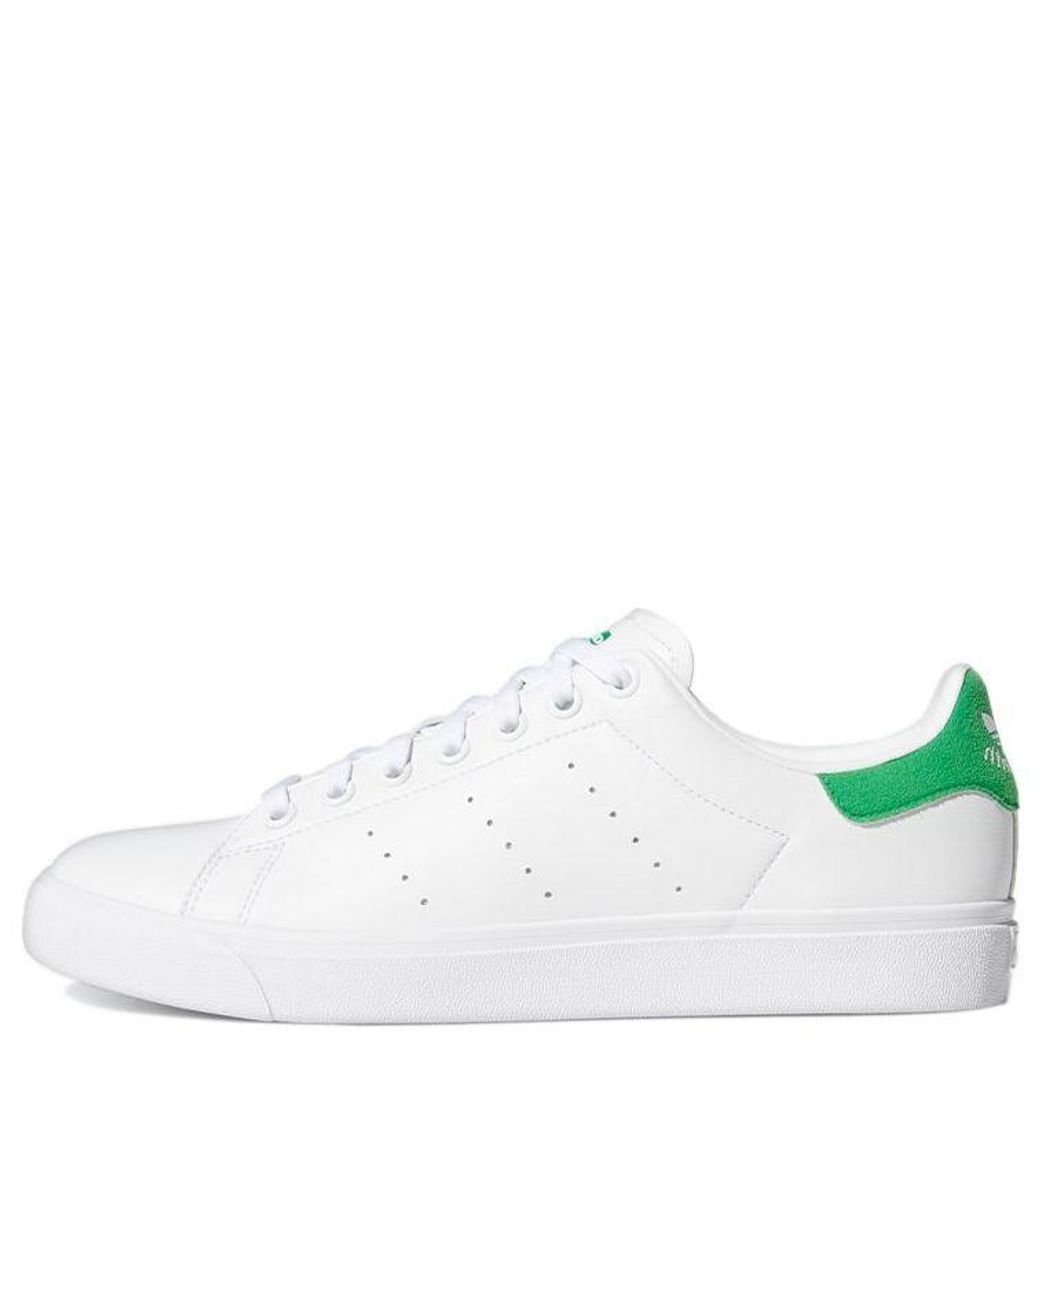 adidas Originals Stan Smith Vulc Shoes White/green for Men | Lyst